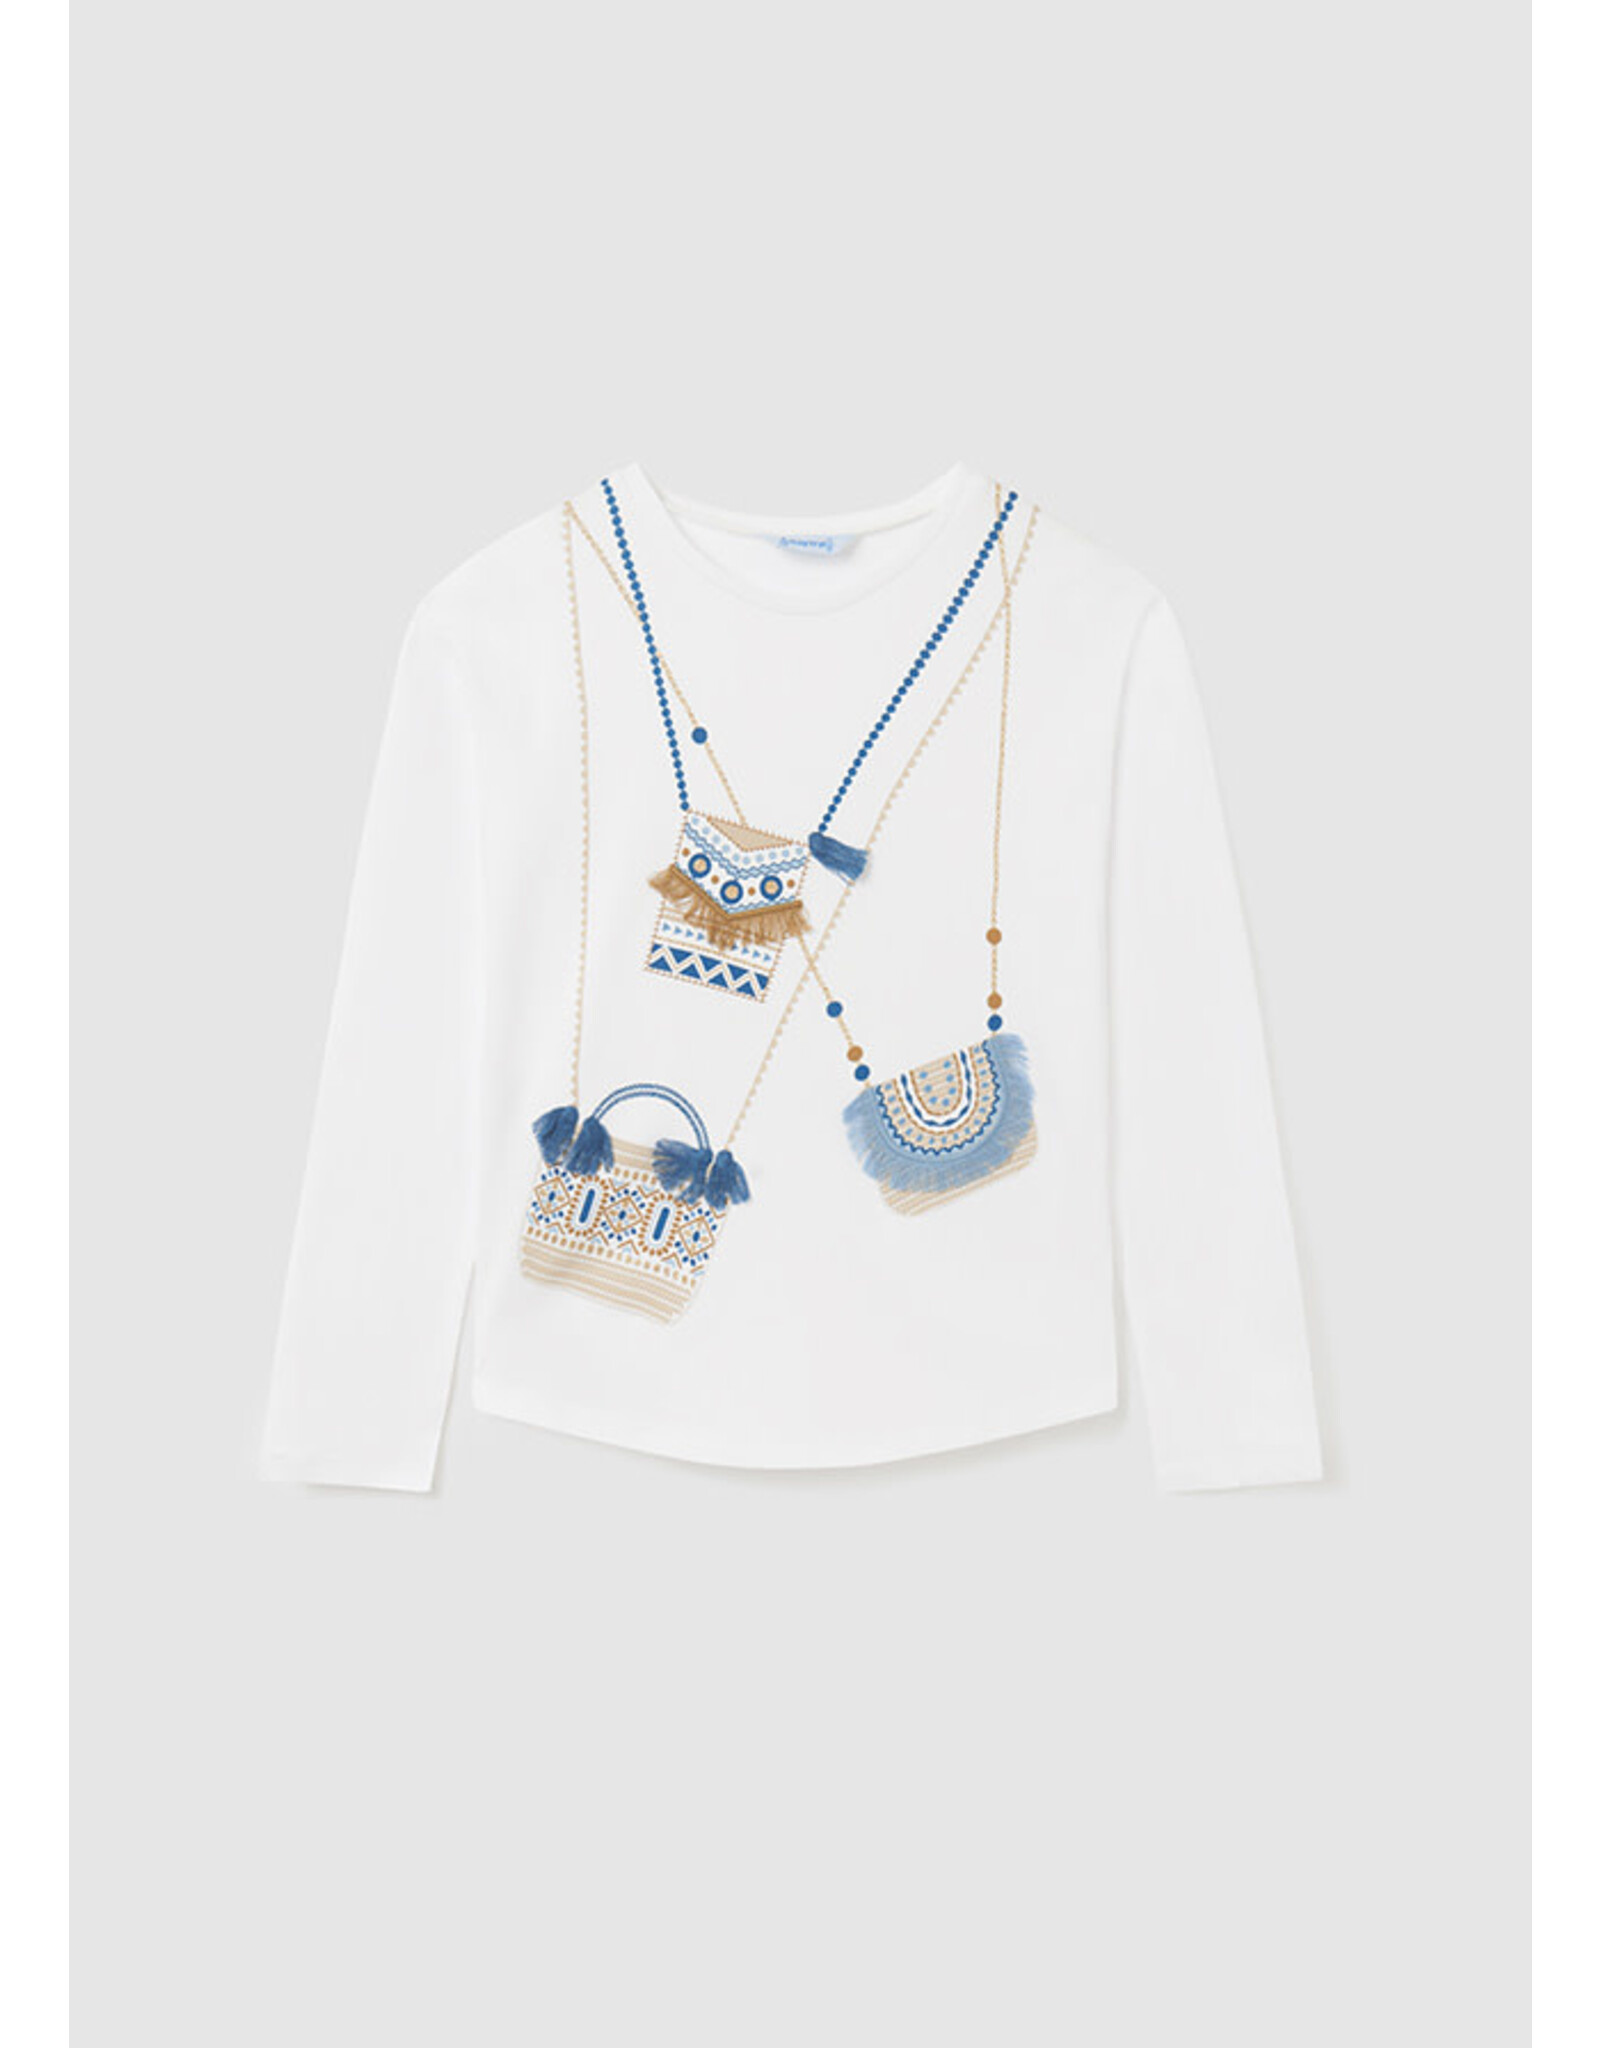 Mayoral Blue Bag Long Sleeve in White